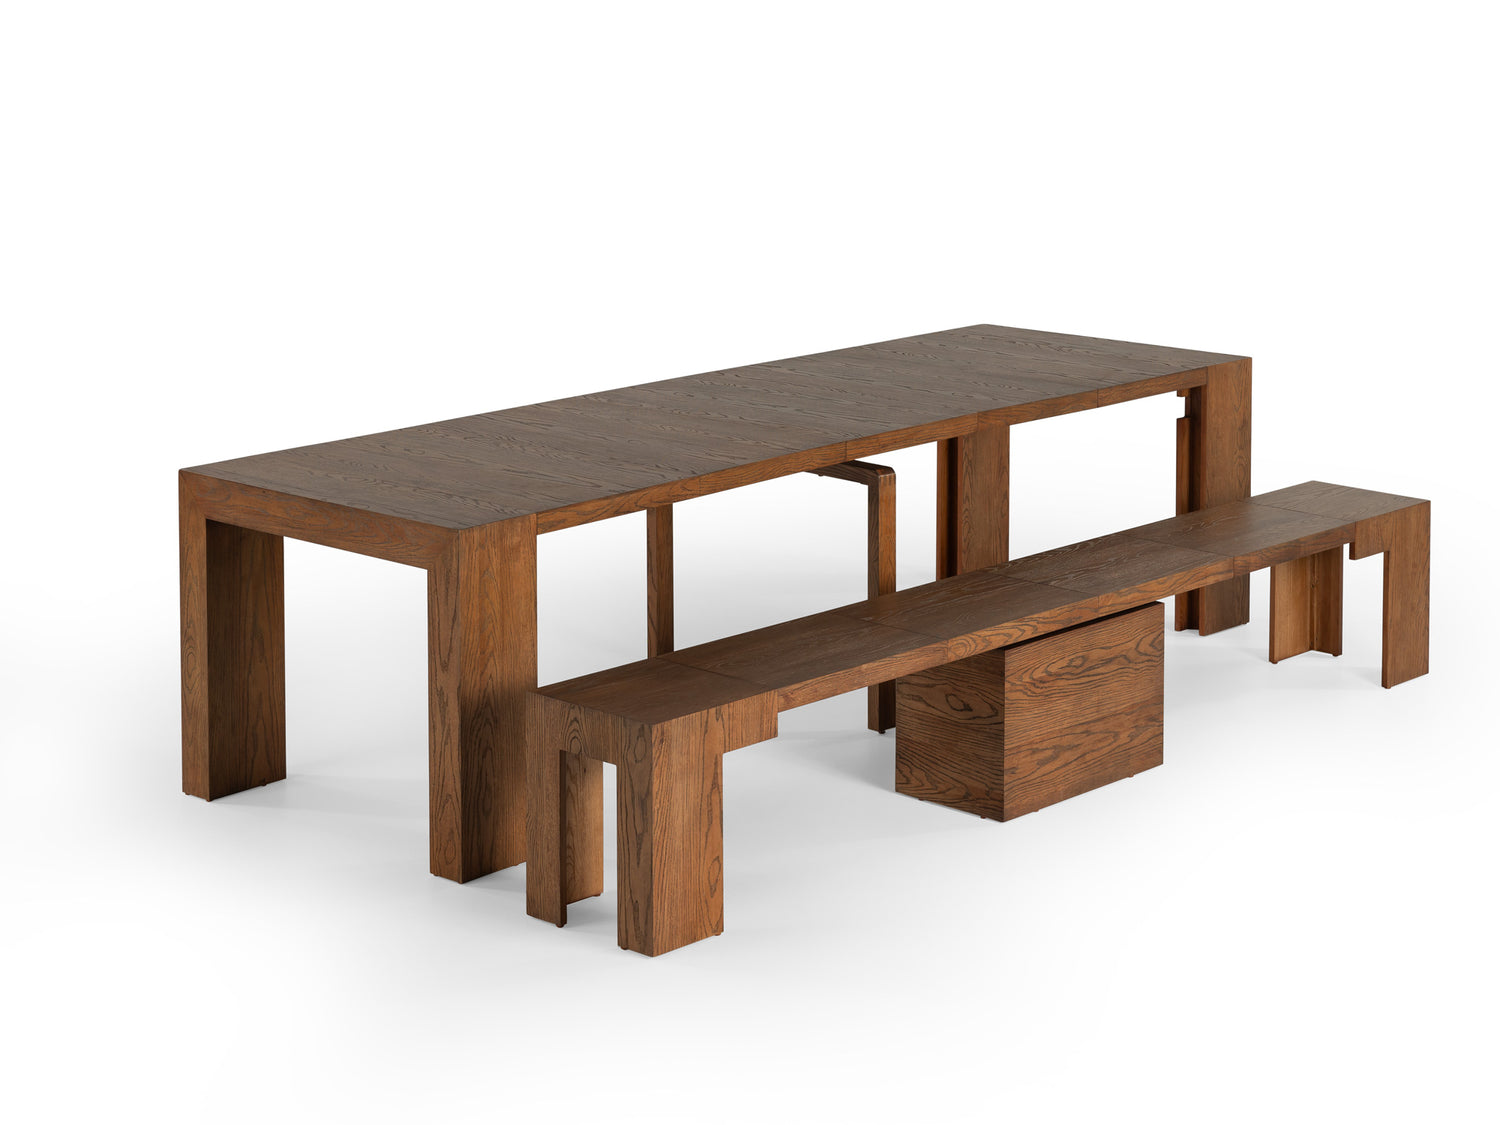 American Walnut::Gallery::Expanded American Walnut Transformer Table Shown with Bench